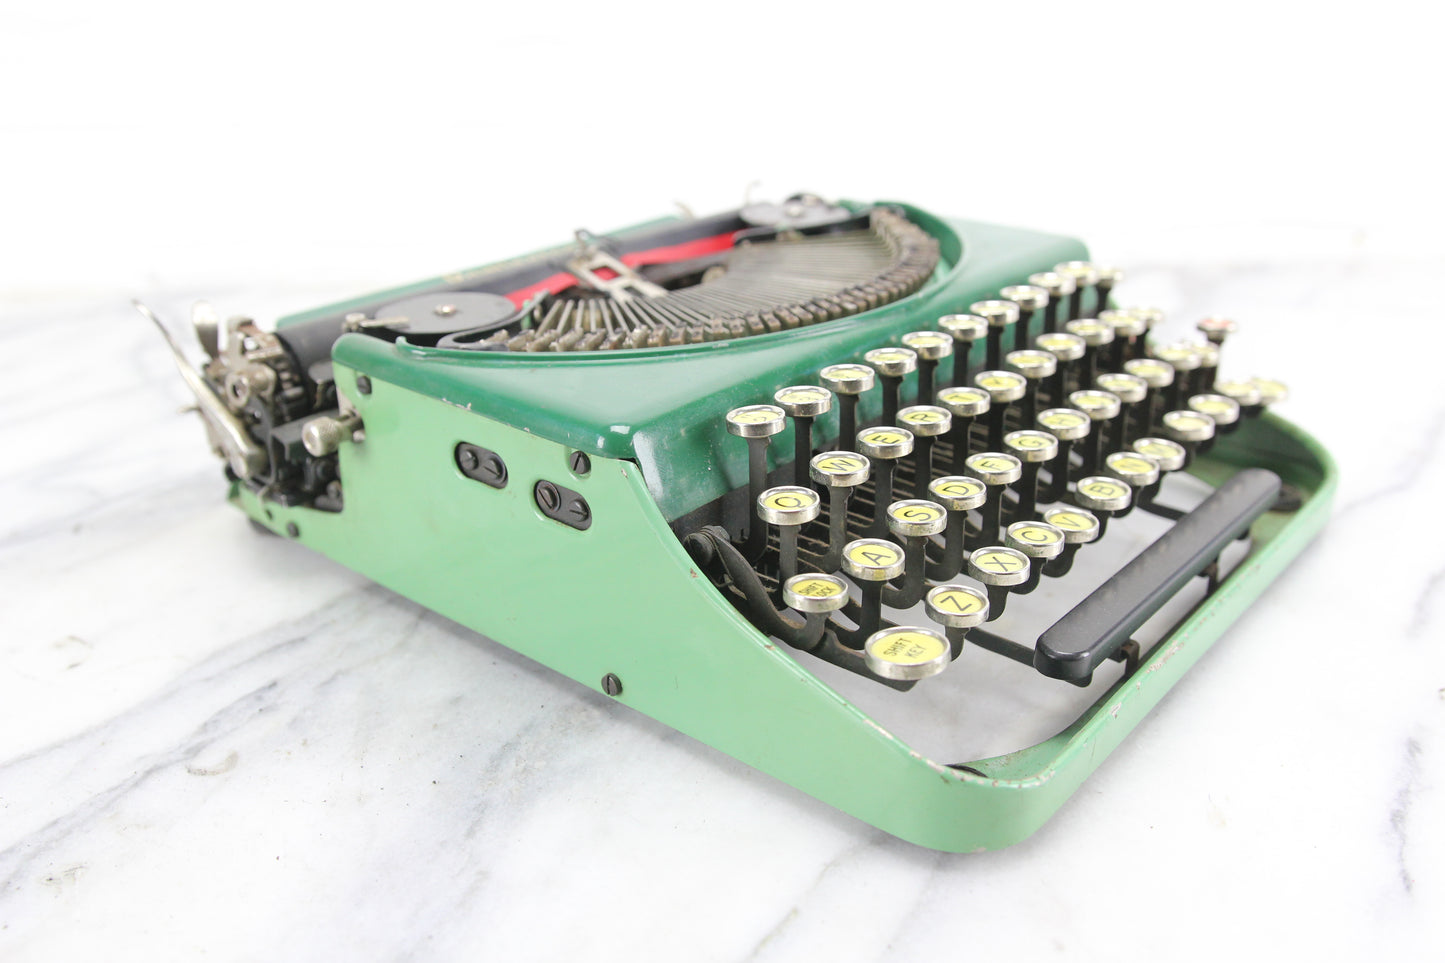 Remington Portable #2 (Green and Seafoam), Made in USA, 1928